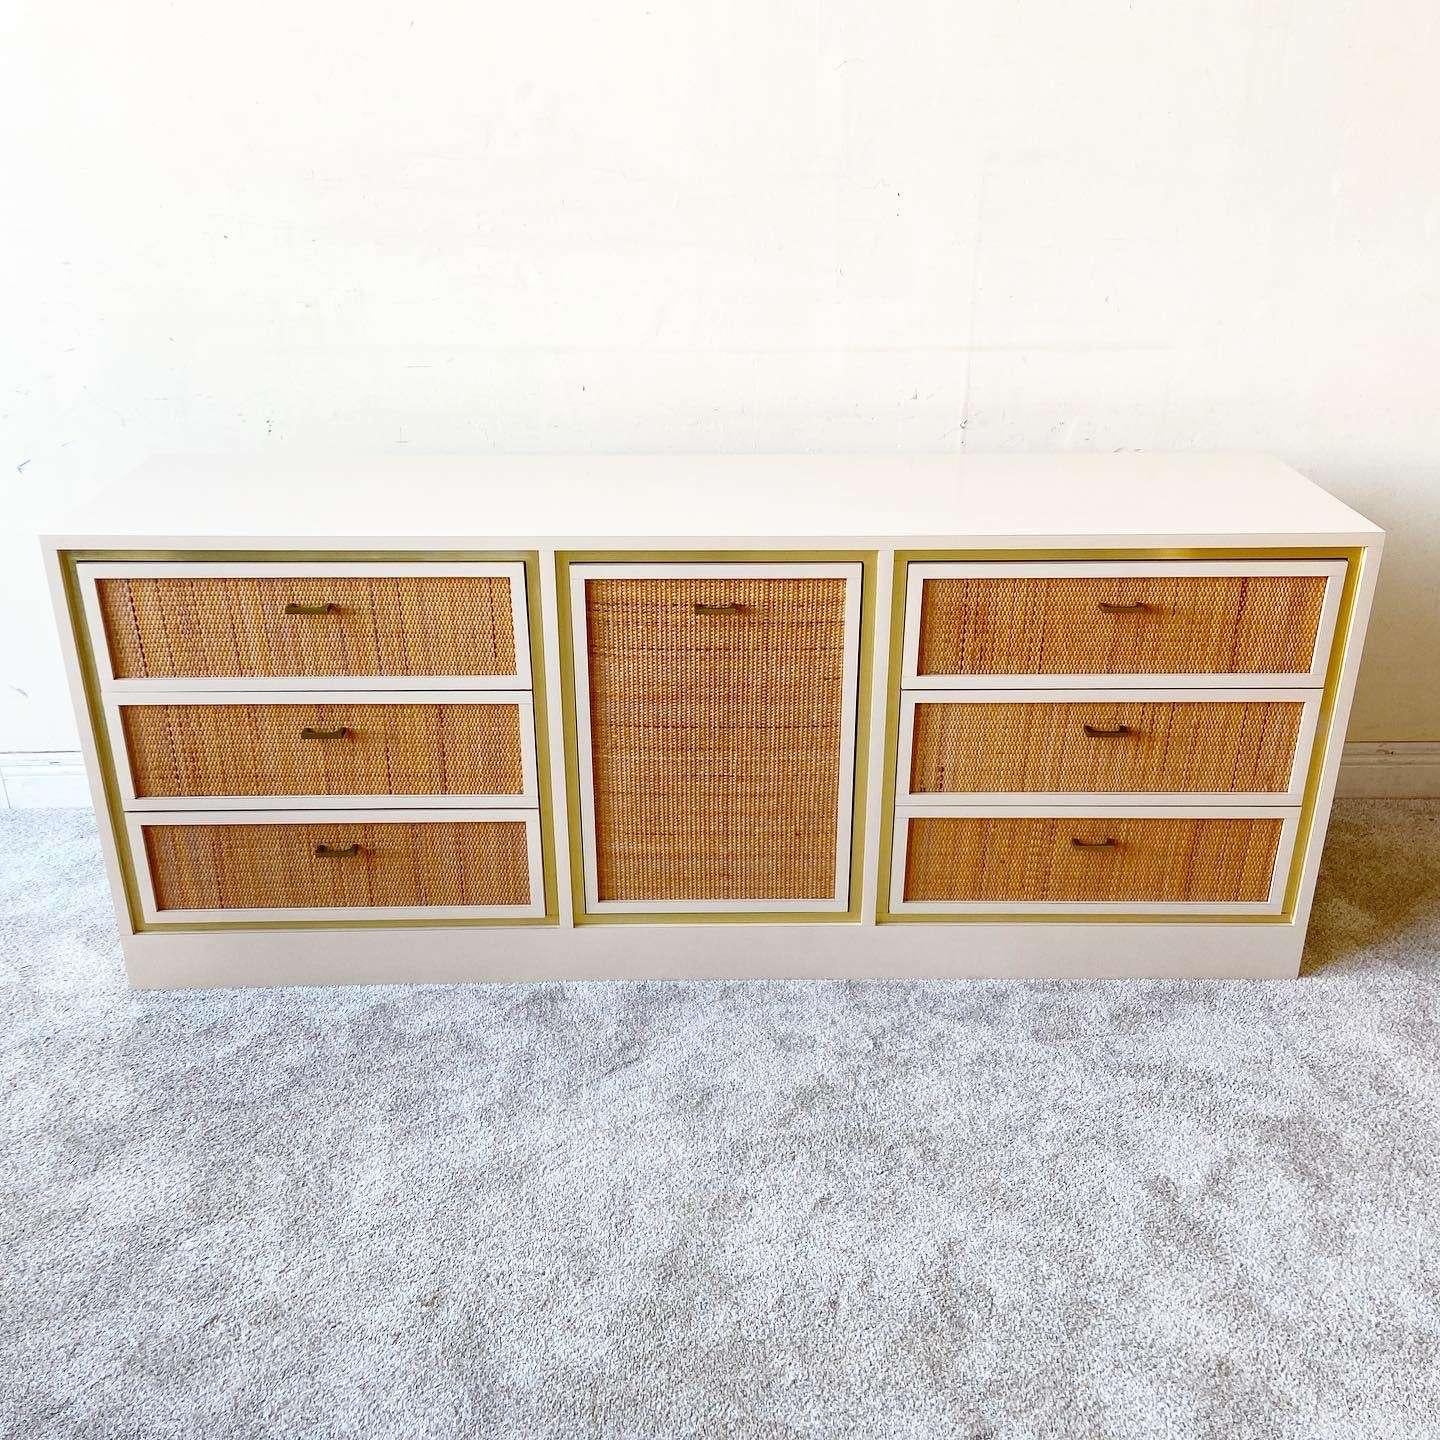 Post-Modern Postmodern Boho Cream Lacquer Laminate and Wicker Dresser - 6 Drawers For Sale